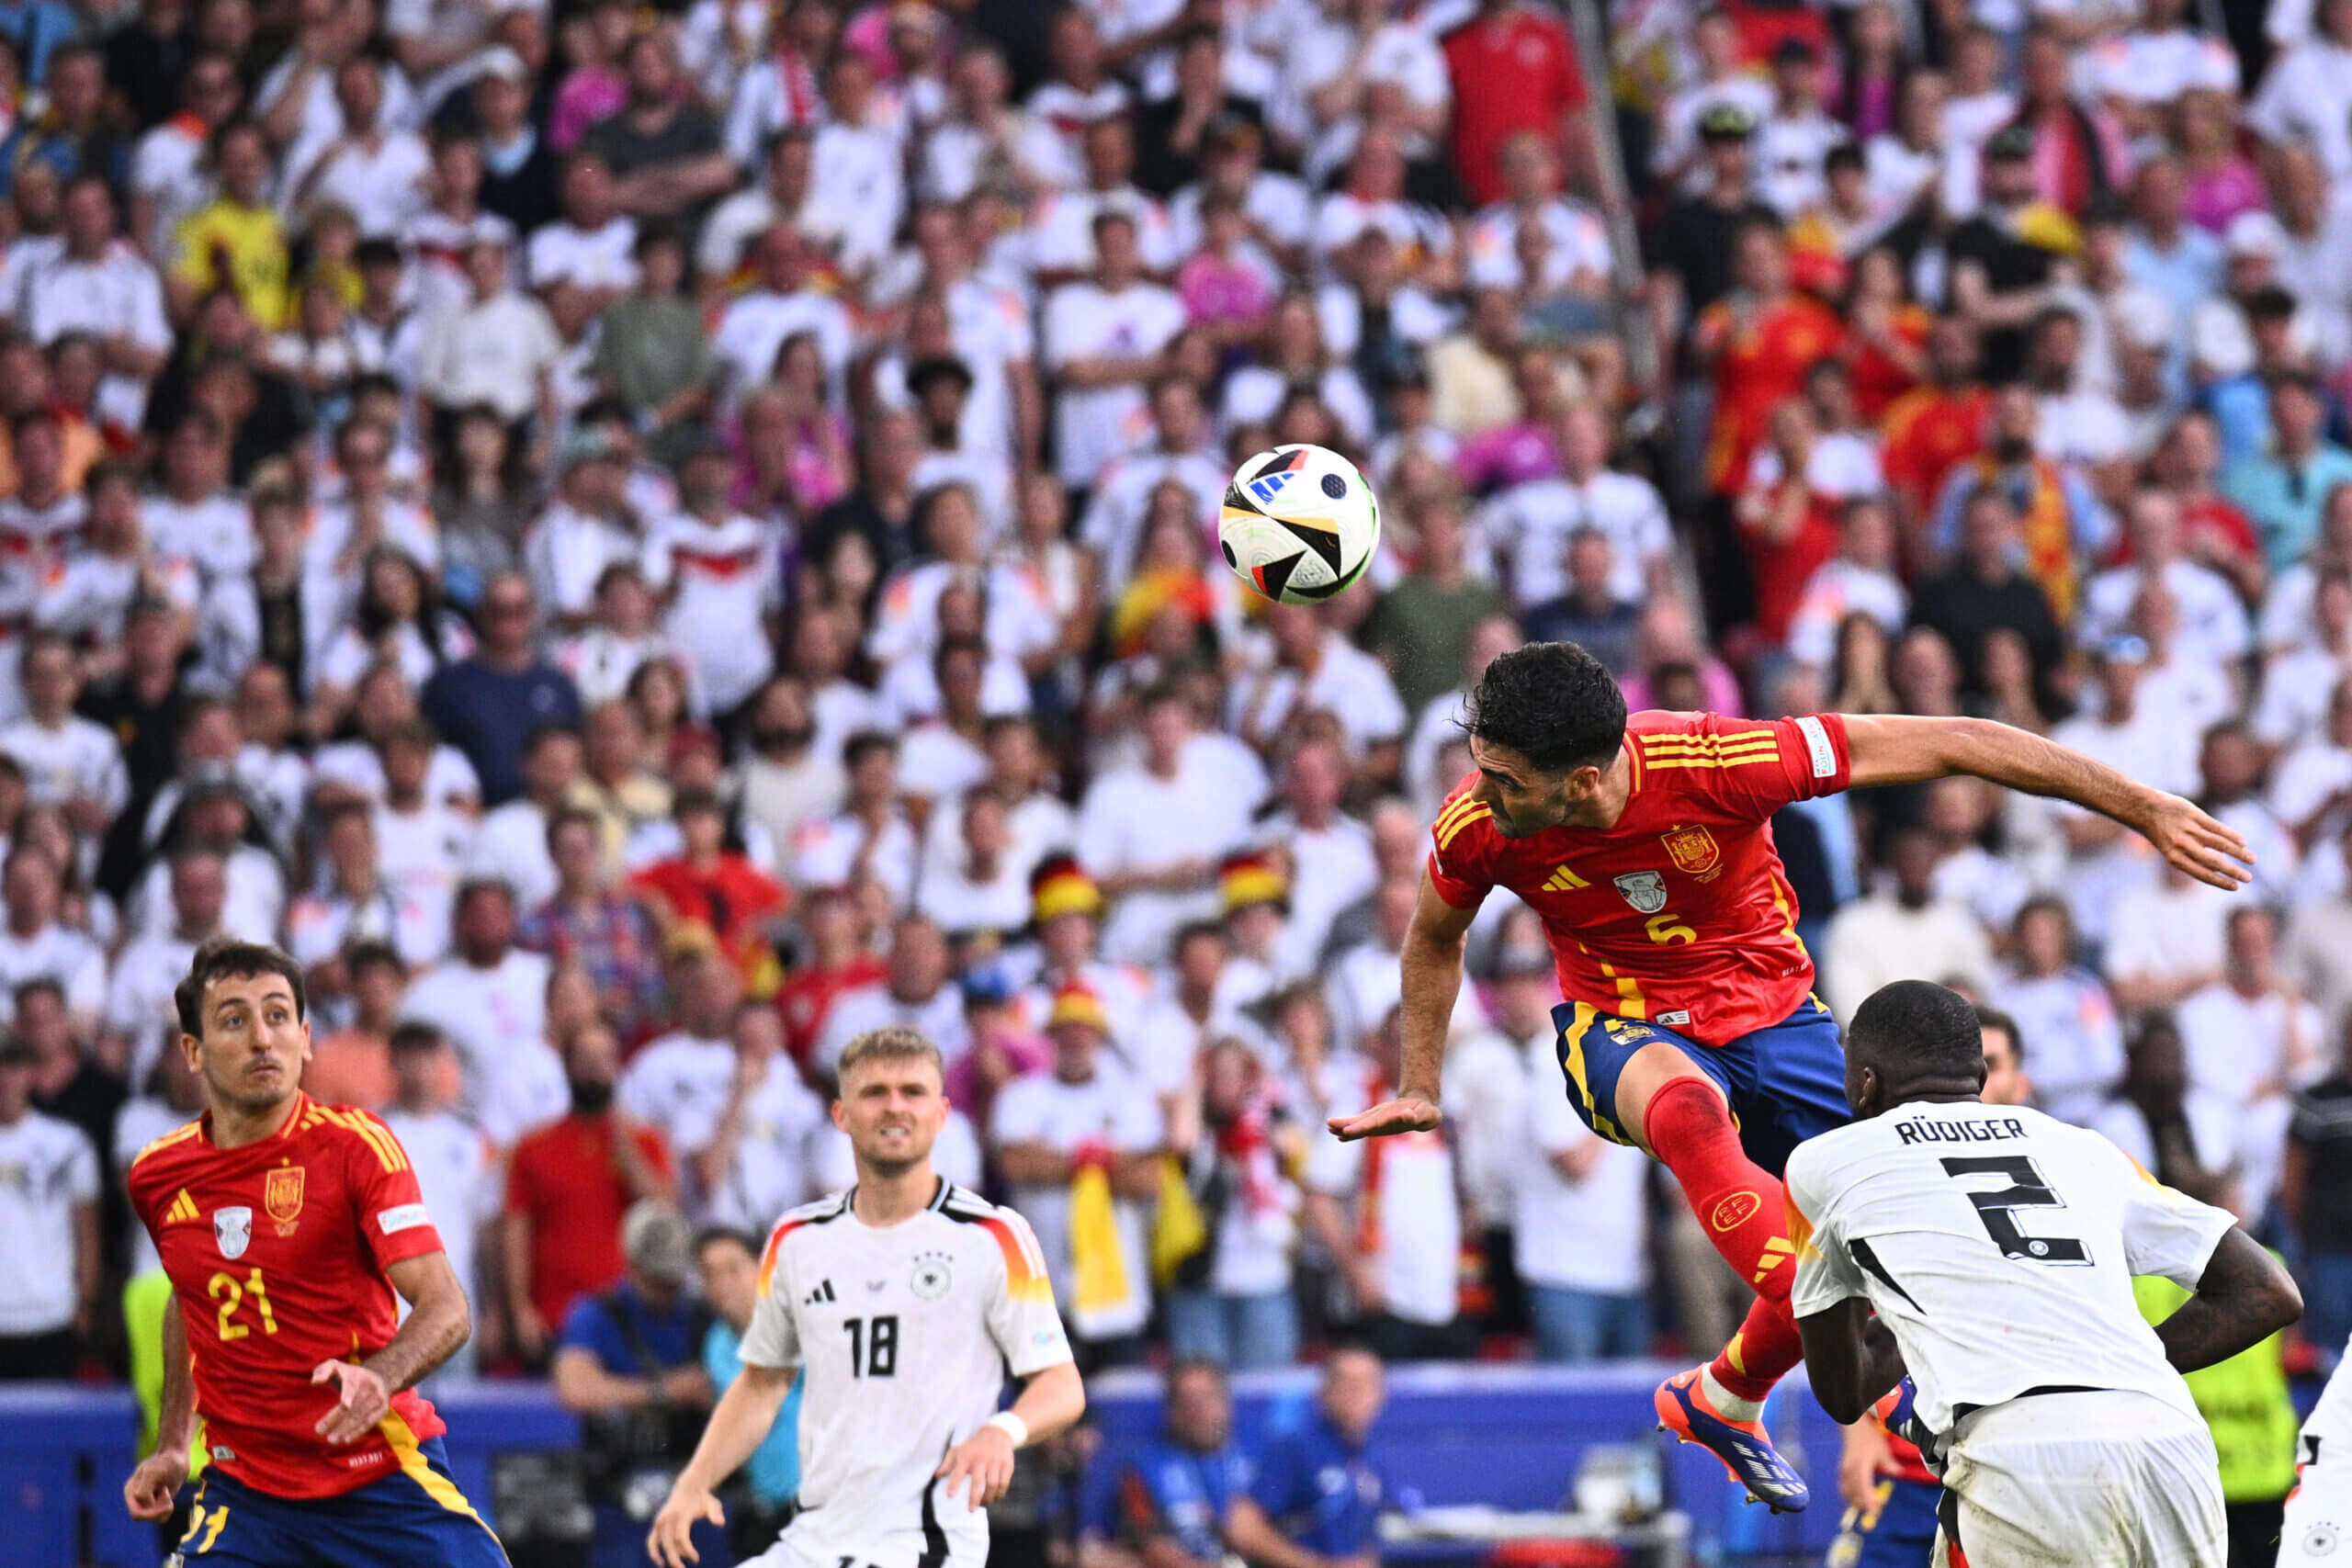 Spain defeats Germany 2-1 to reach European Cup final